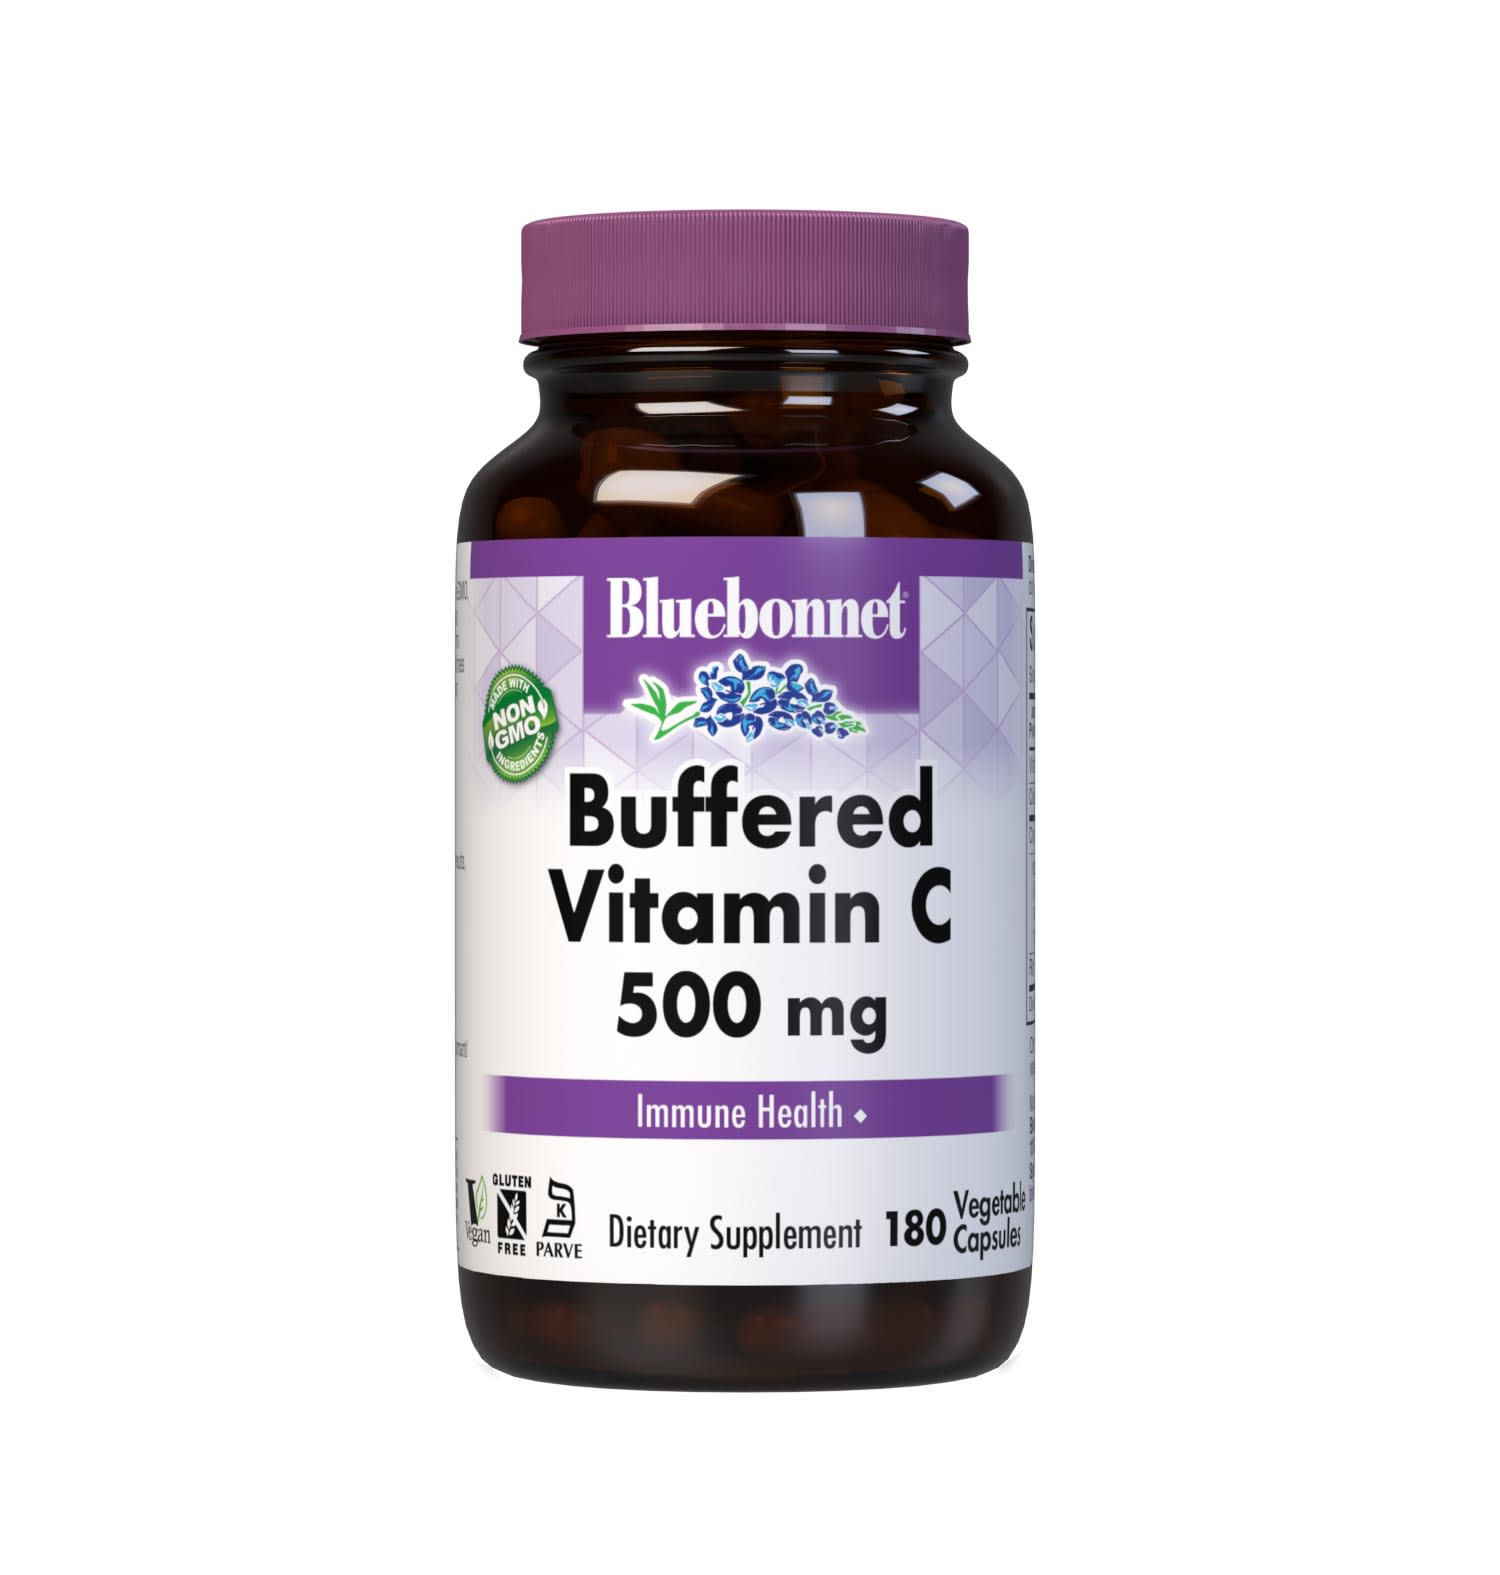 Bluebonnet’s Buffered Vitamin C-500 mg 180 Vegetable Capsules are formulated with non-GMO identity-preserved (IP) vitamin C from calcium ascorbate, along with citrus bioflavonoids from oranges, lemons, tangerines, grapefruit and limes as well as hesperidin and rutin to help support immune function. #size_180 count